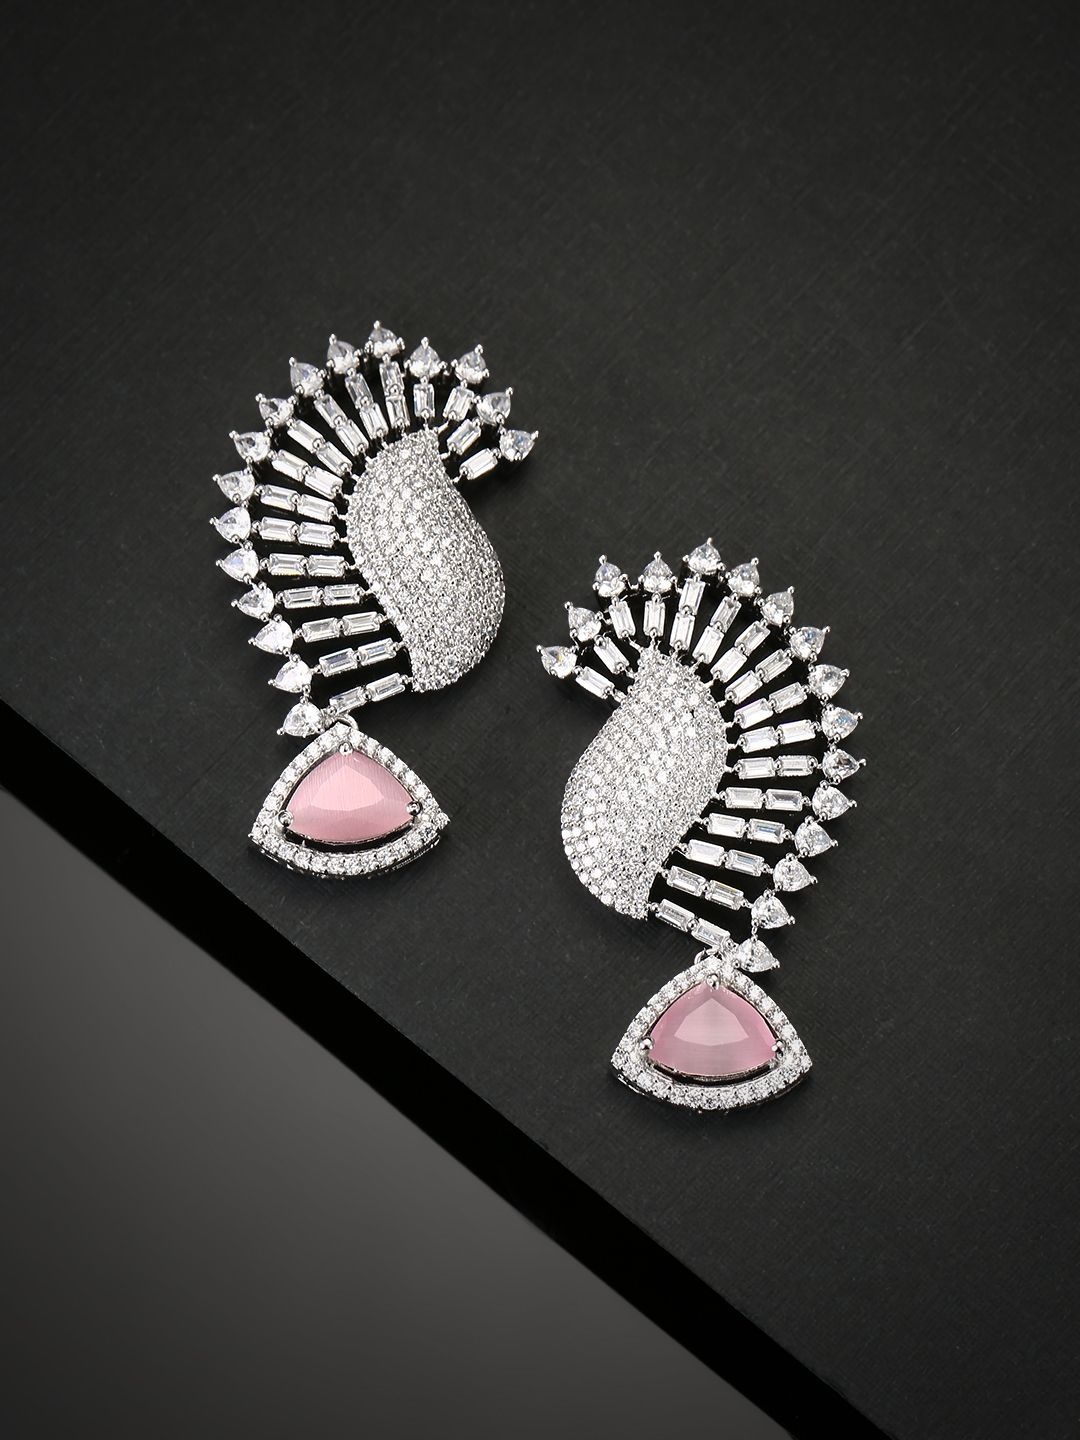 Priyaasi Silver-Plated Stone Studded Handcrafted Contemporary Drop Earrings Price in India